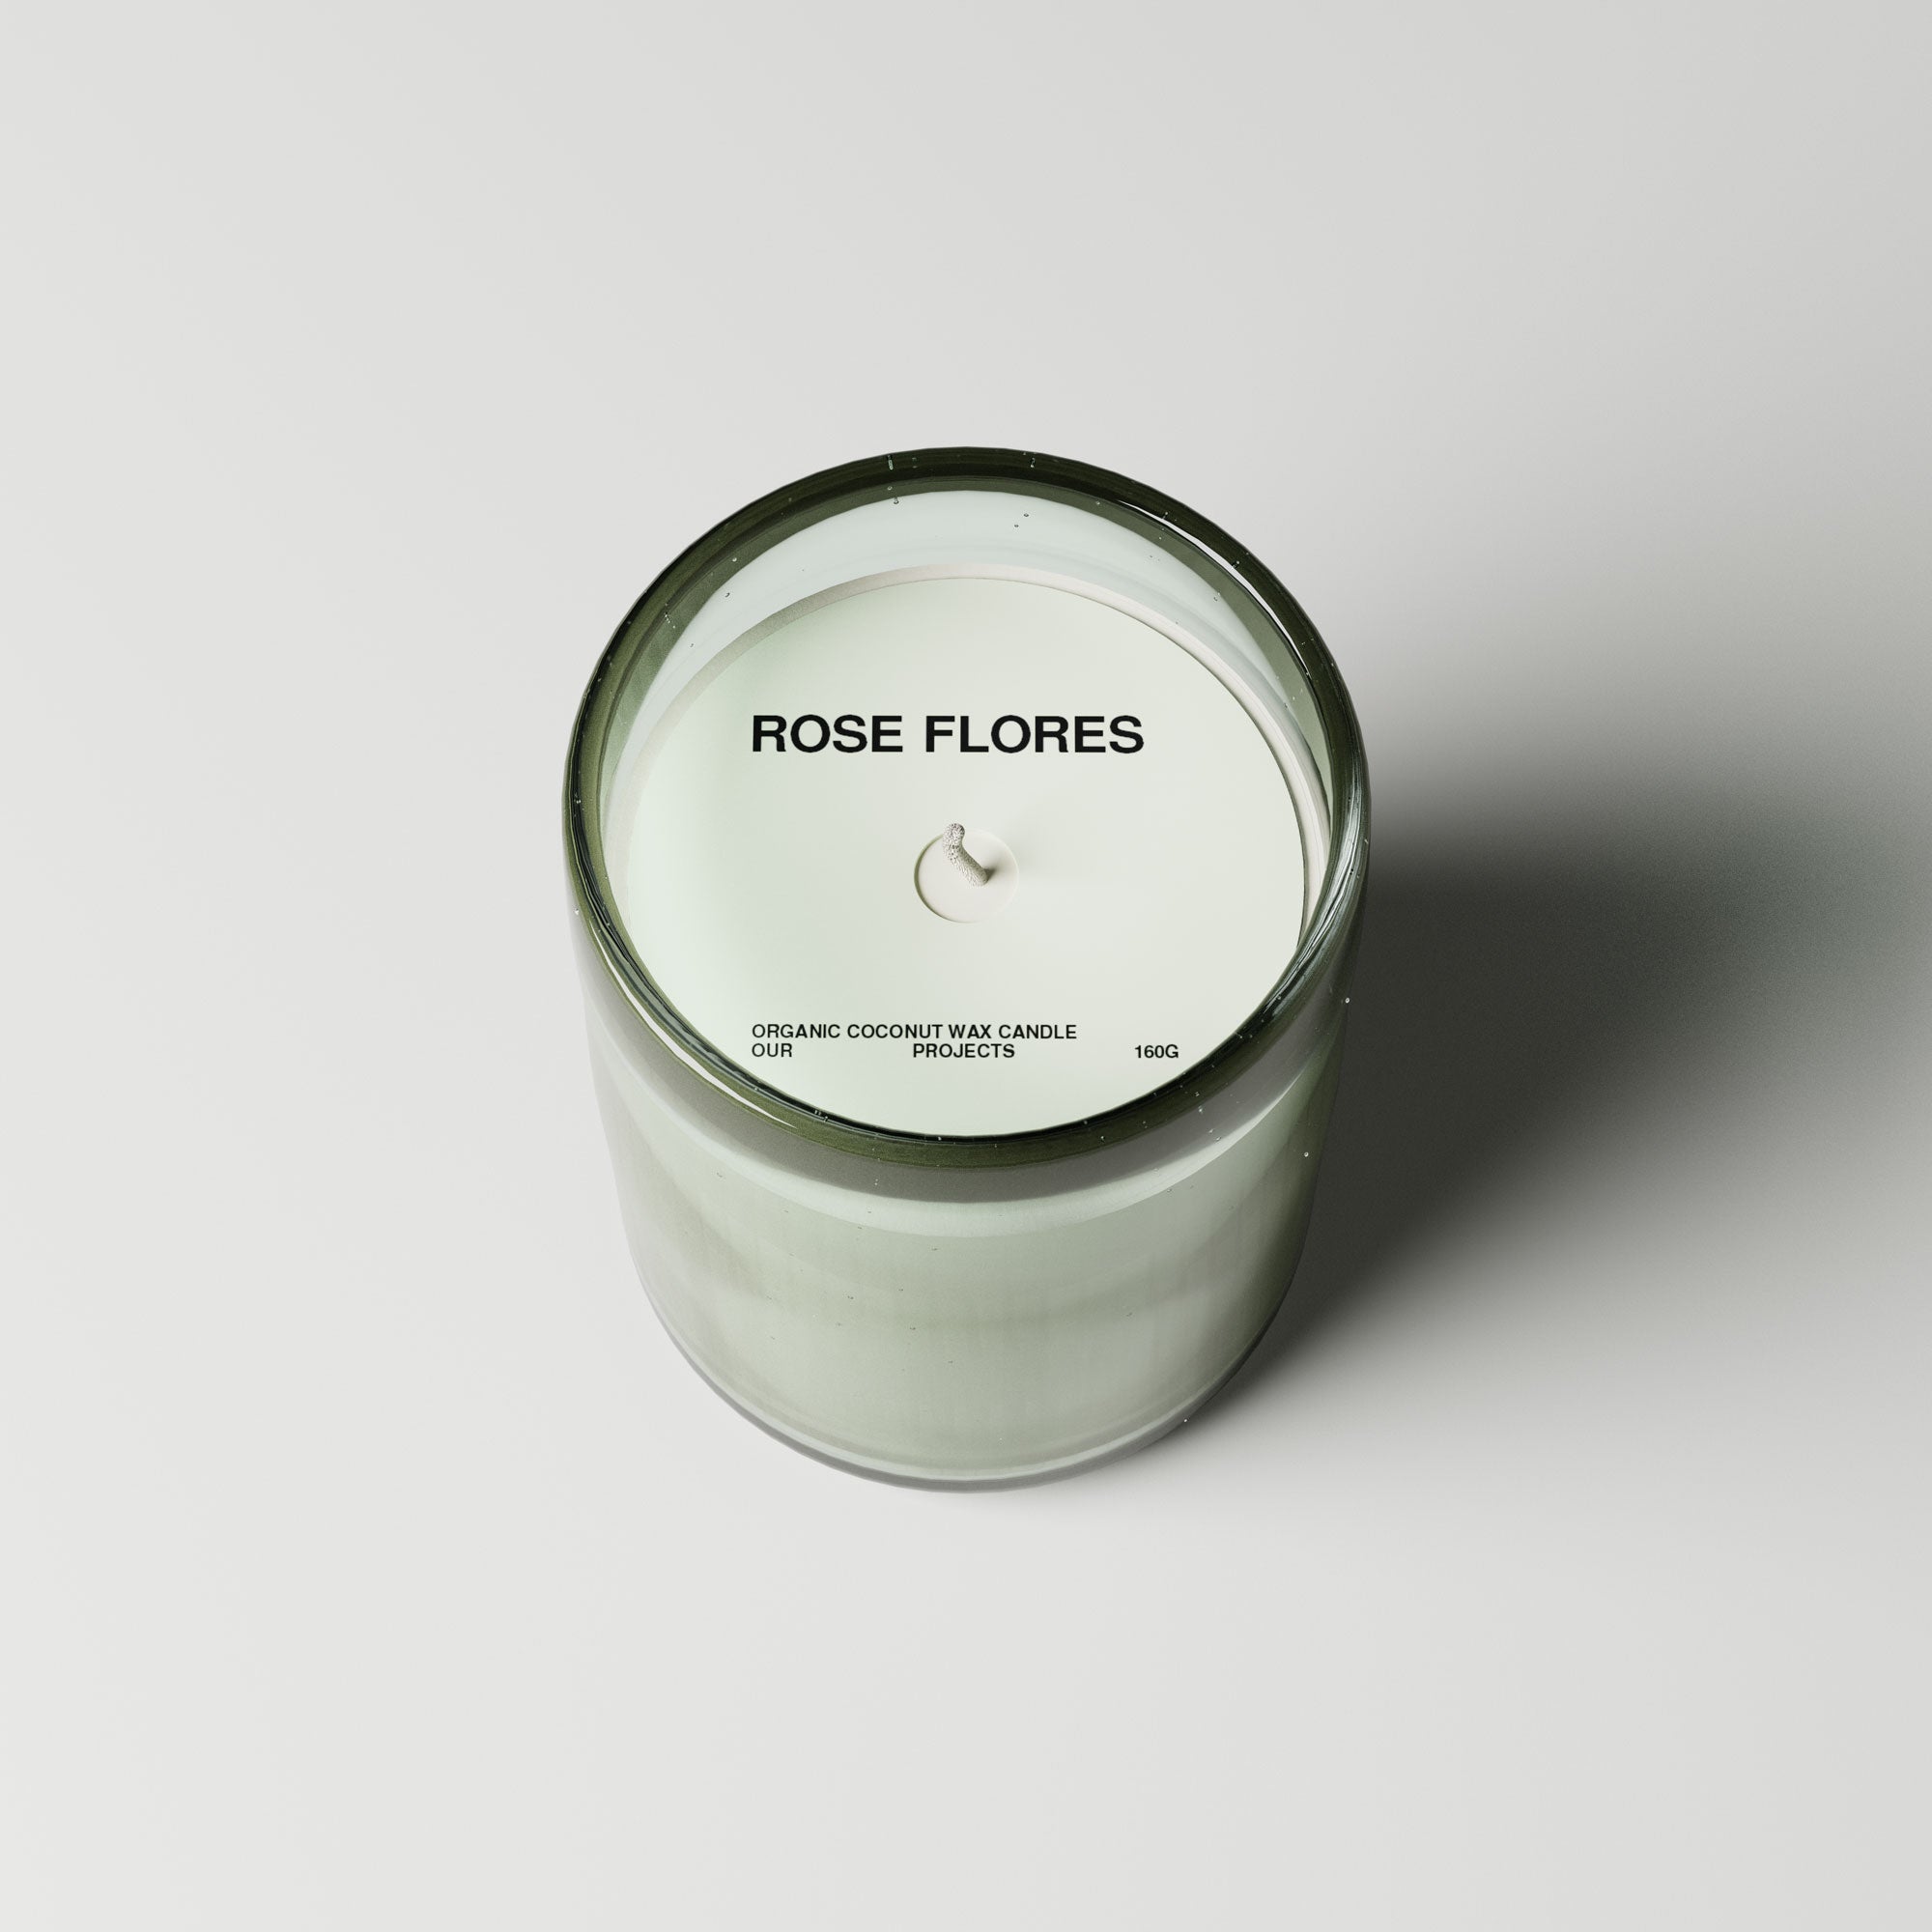 Rose flores Coconut Wax Candle